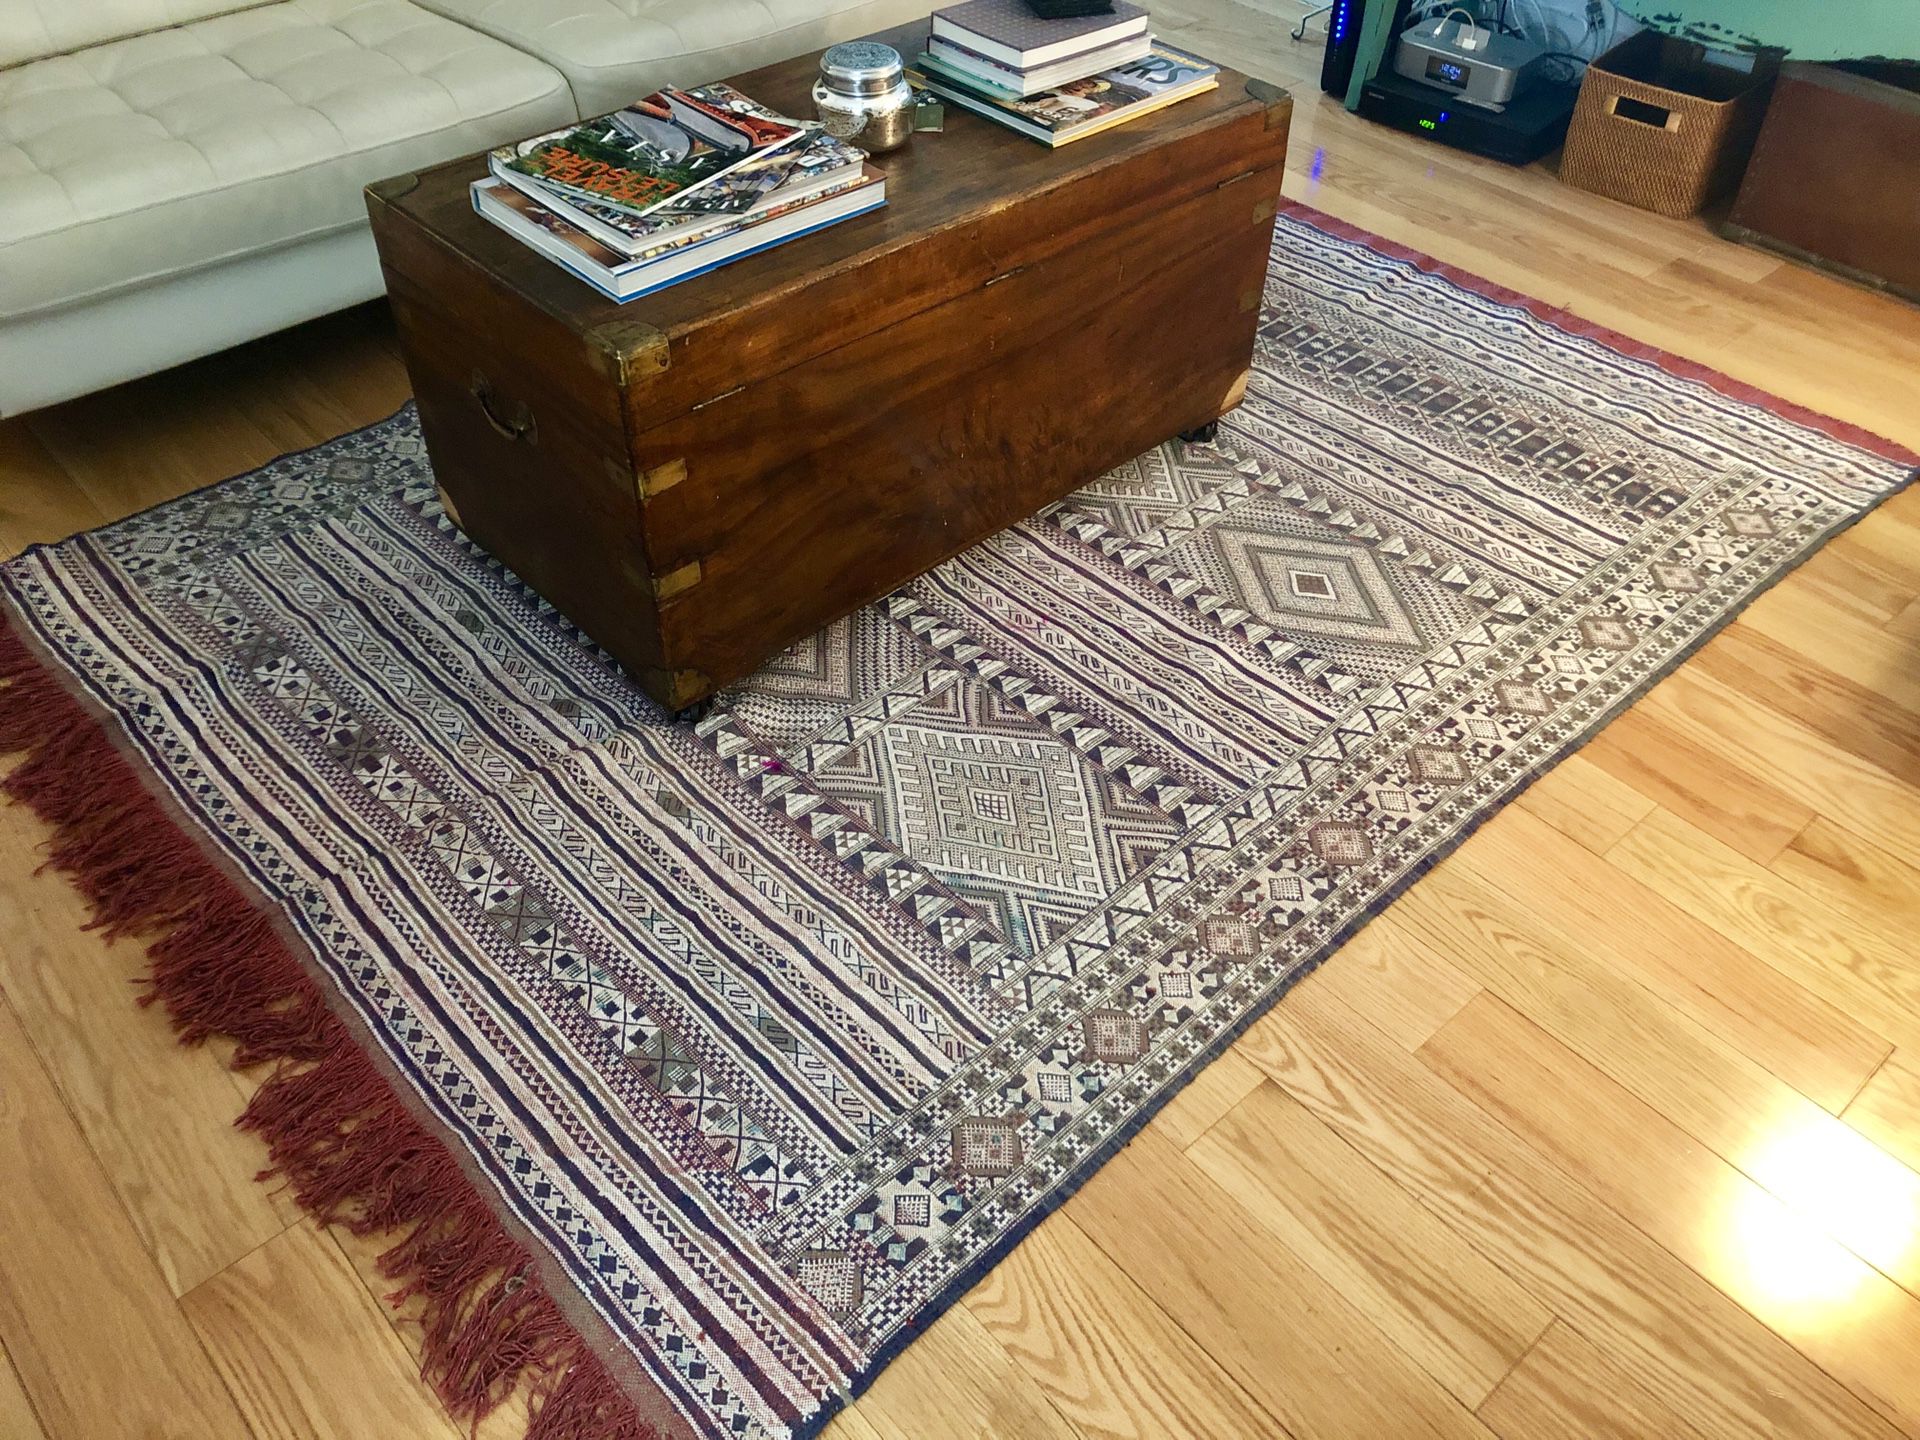 Authentic Morrocan rug